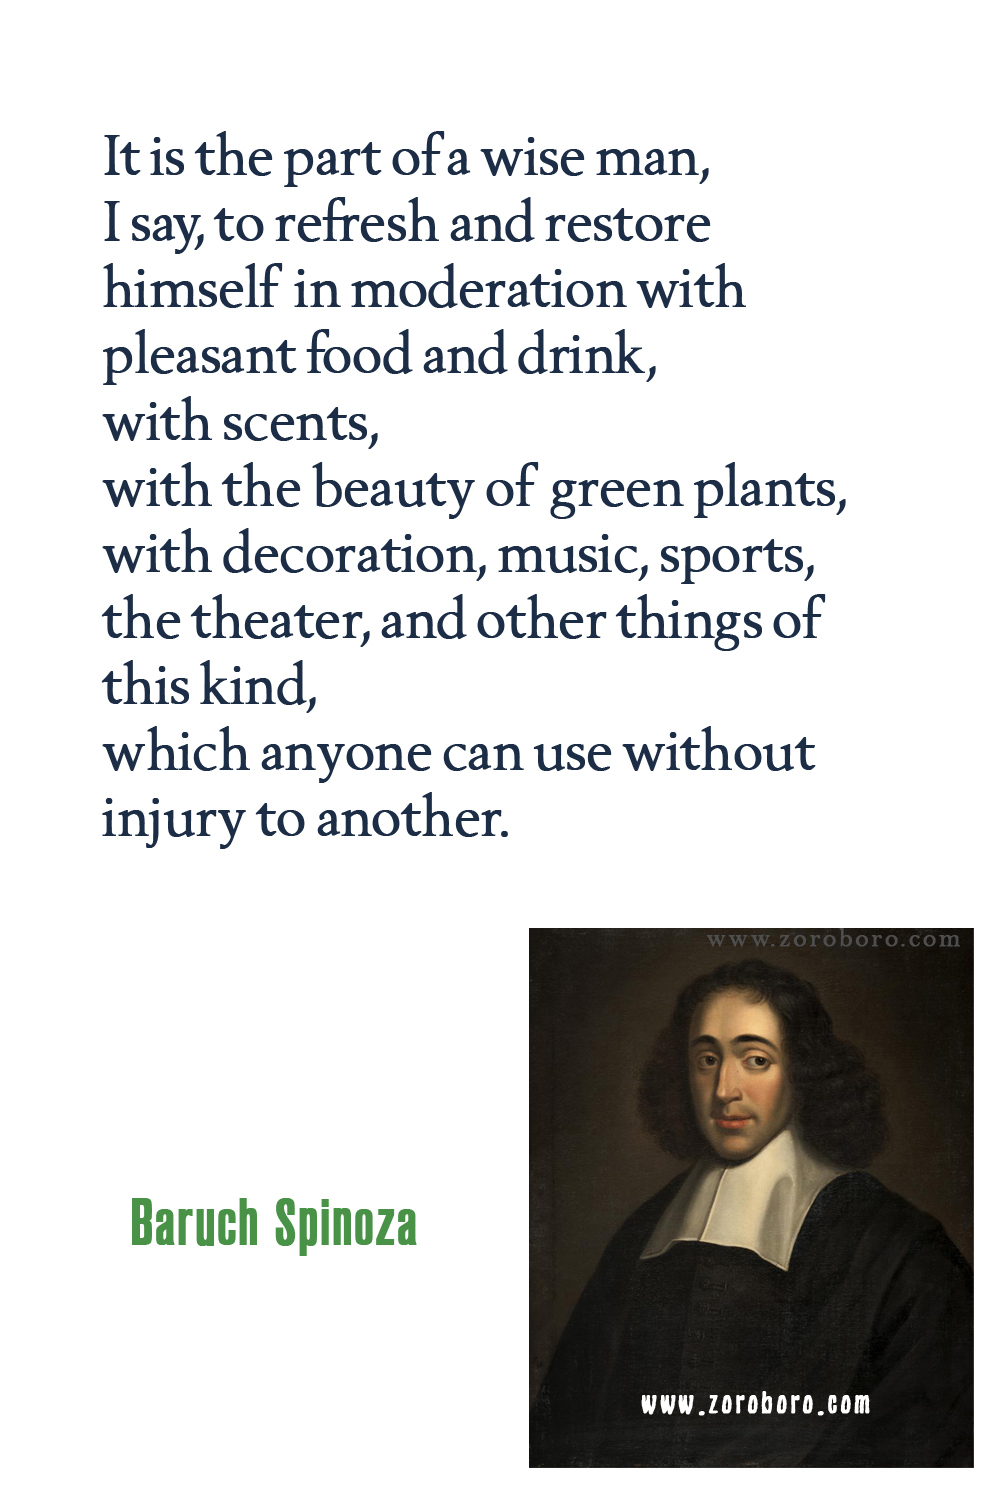 Baruch Spinoza Quotes, Atheism, Desire, Emotions, Life, & Virtue Quotes, Baruch Spinoza Philosophy. Baruch Spinoza Books Quotes, Baruch Spinoza Ethics Quotes.